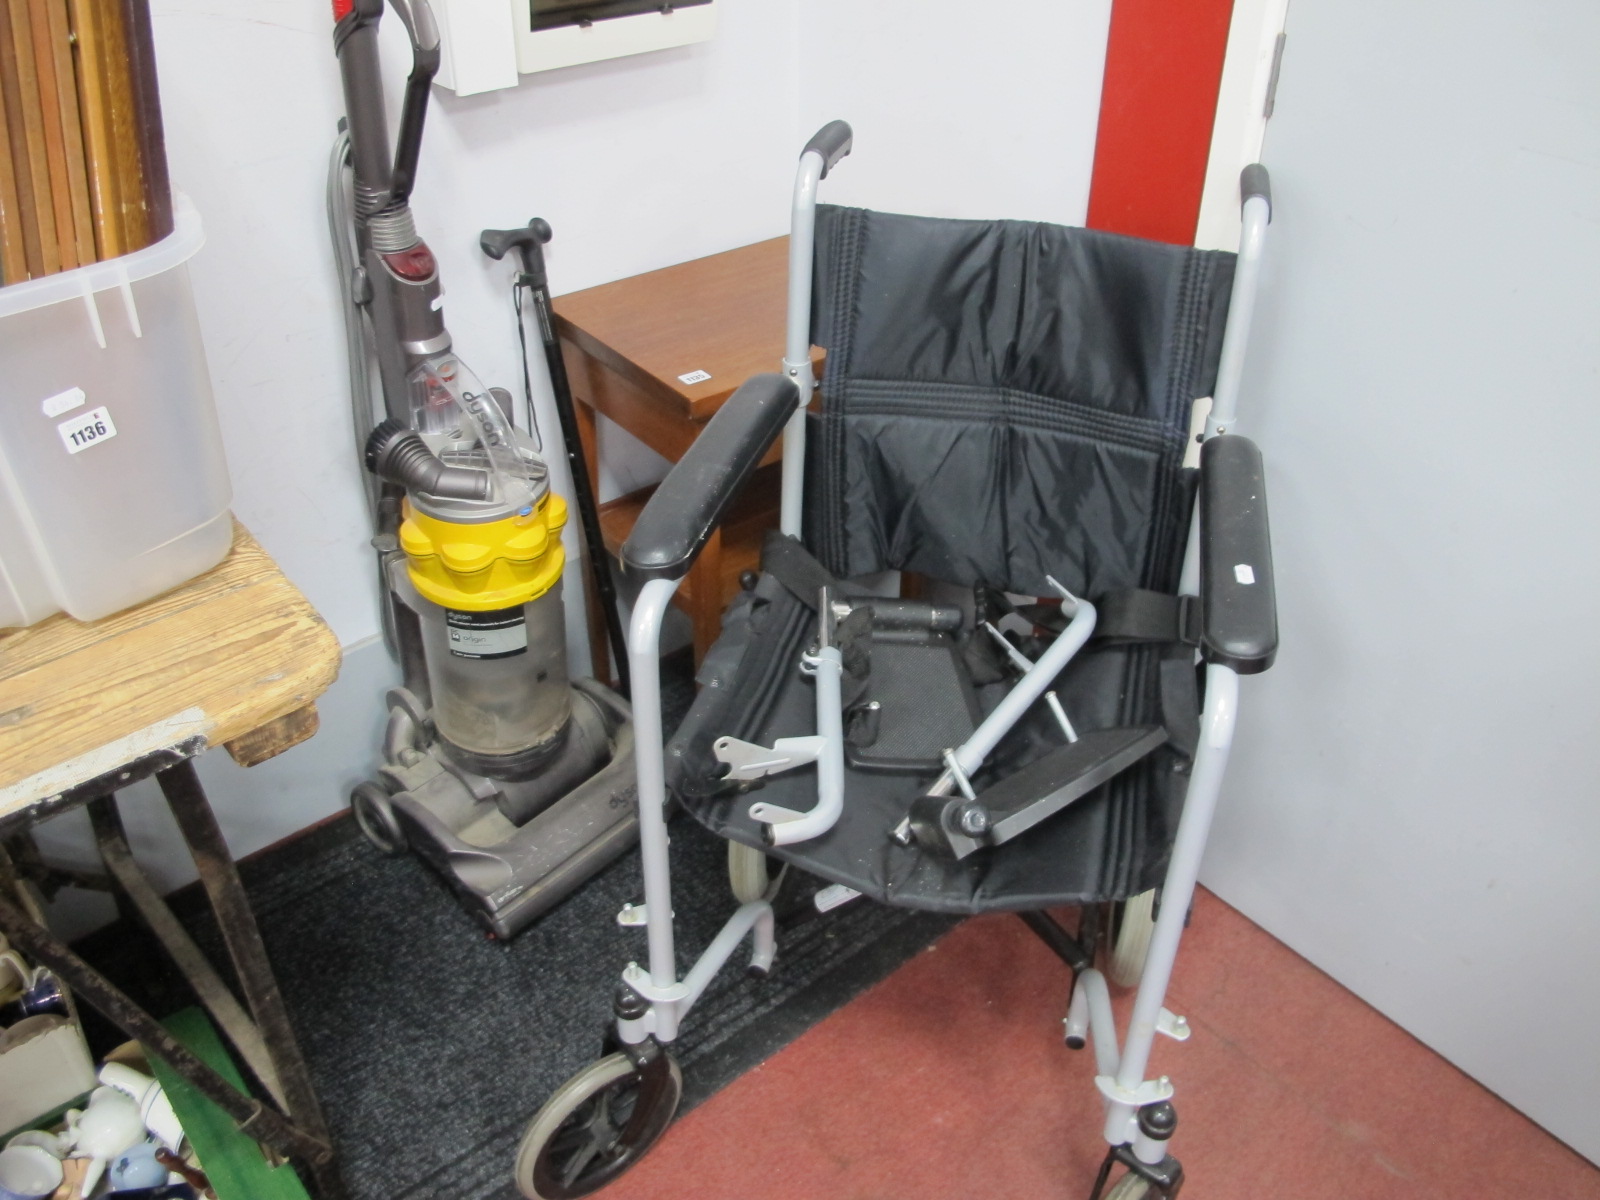 Folding Invalid Chair, Dyson upright vacuum cleaner, untested: sold for parts only, side table.